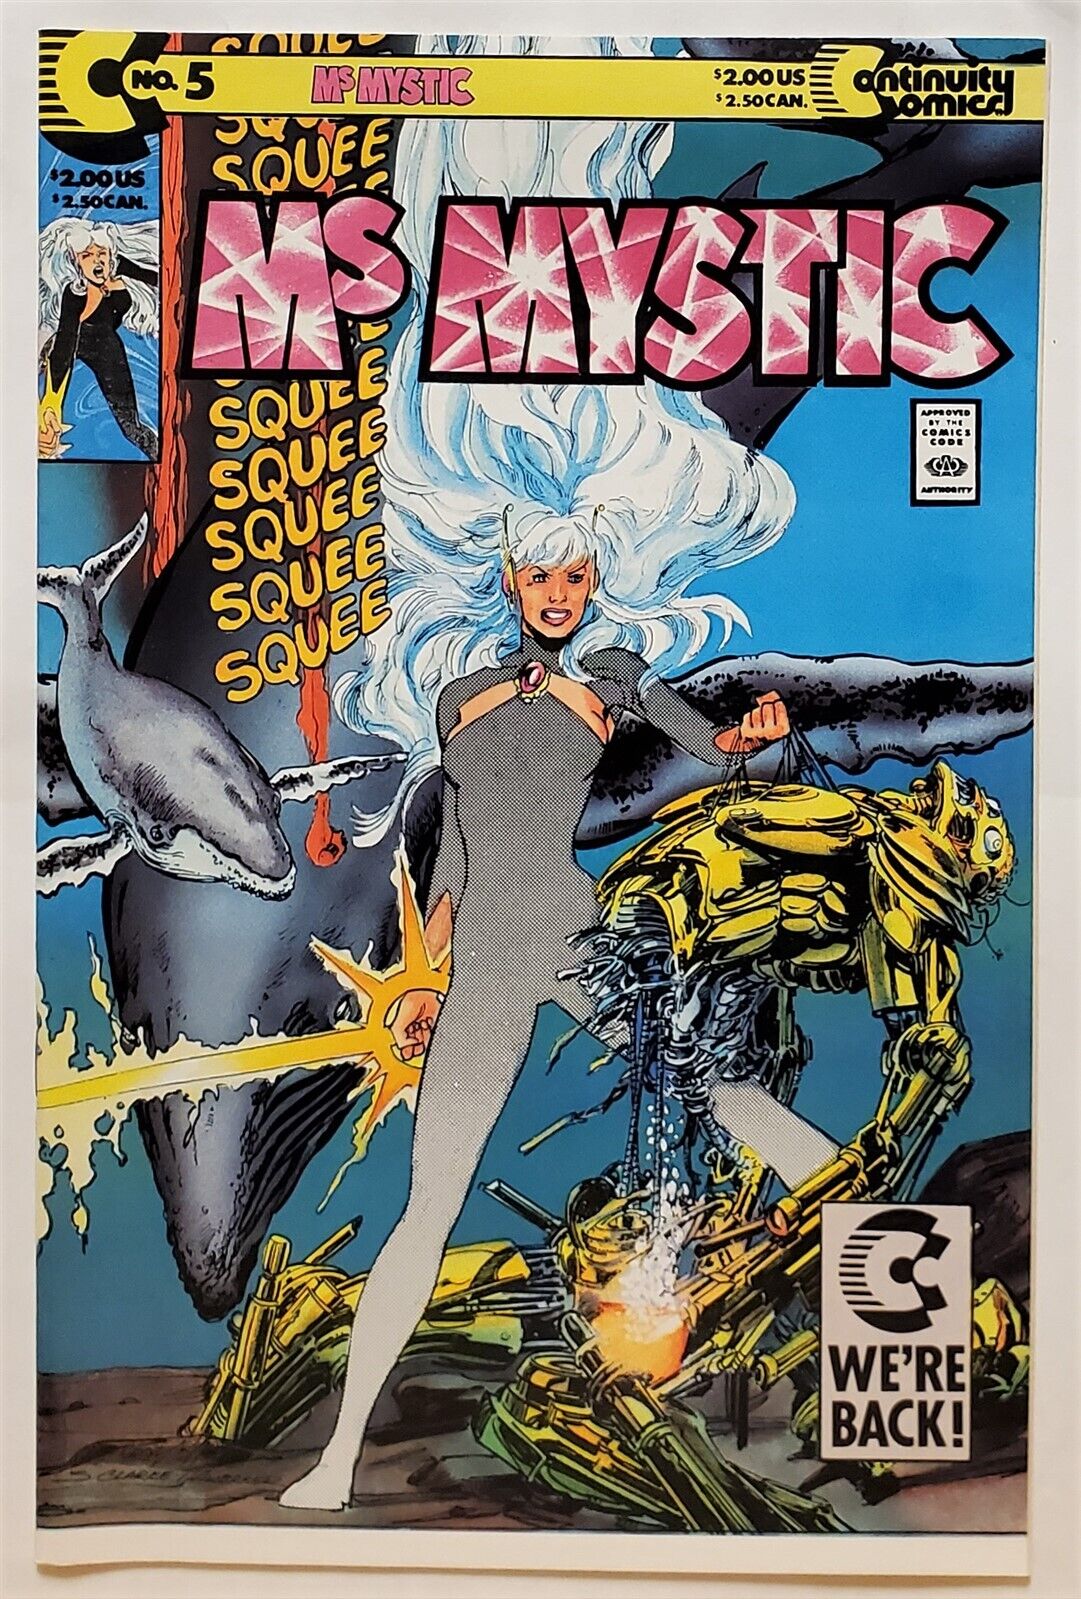 Ms. Mystic #5 (Aug 1990, Continuity) 7.0 FN/VF 